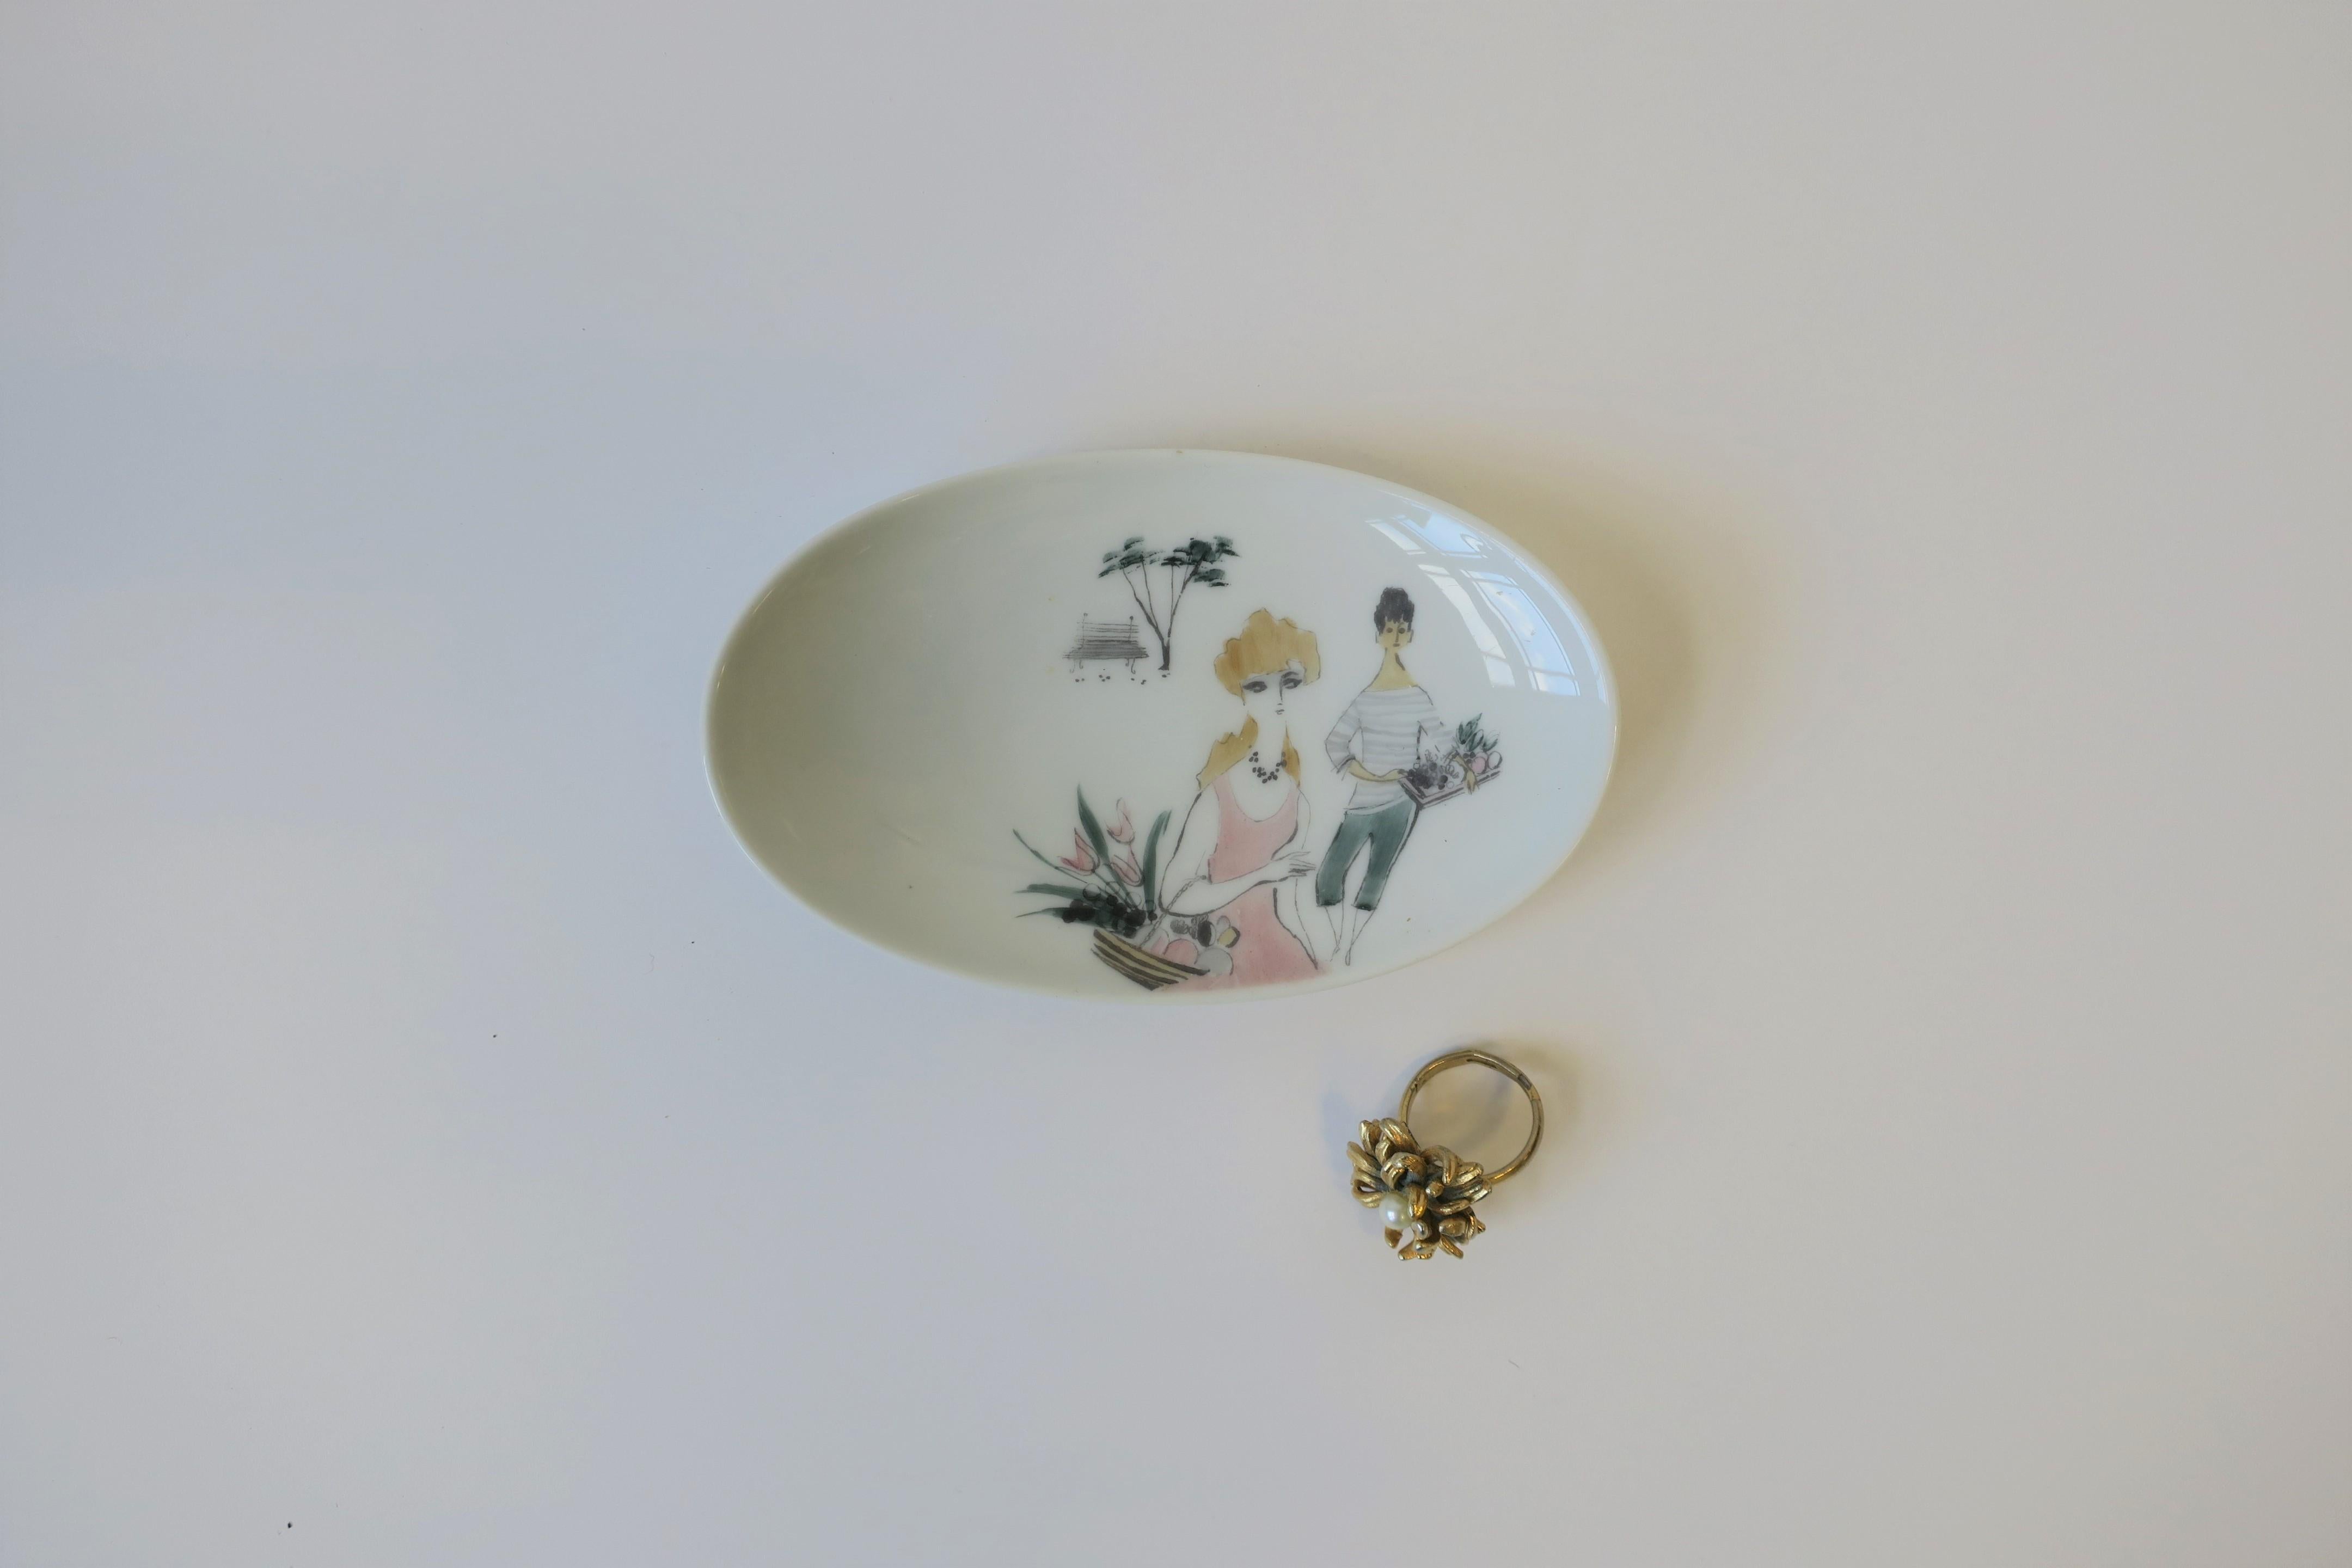 Female Figures White Porcelain Jewelry Dish by Rosenthal, 20th Century For Sale 1